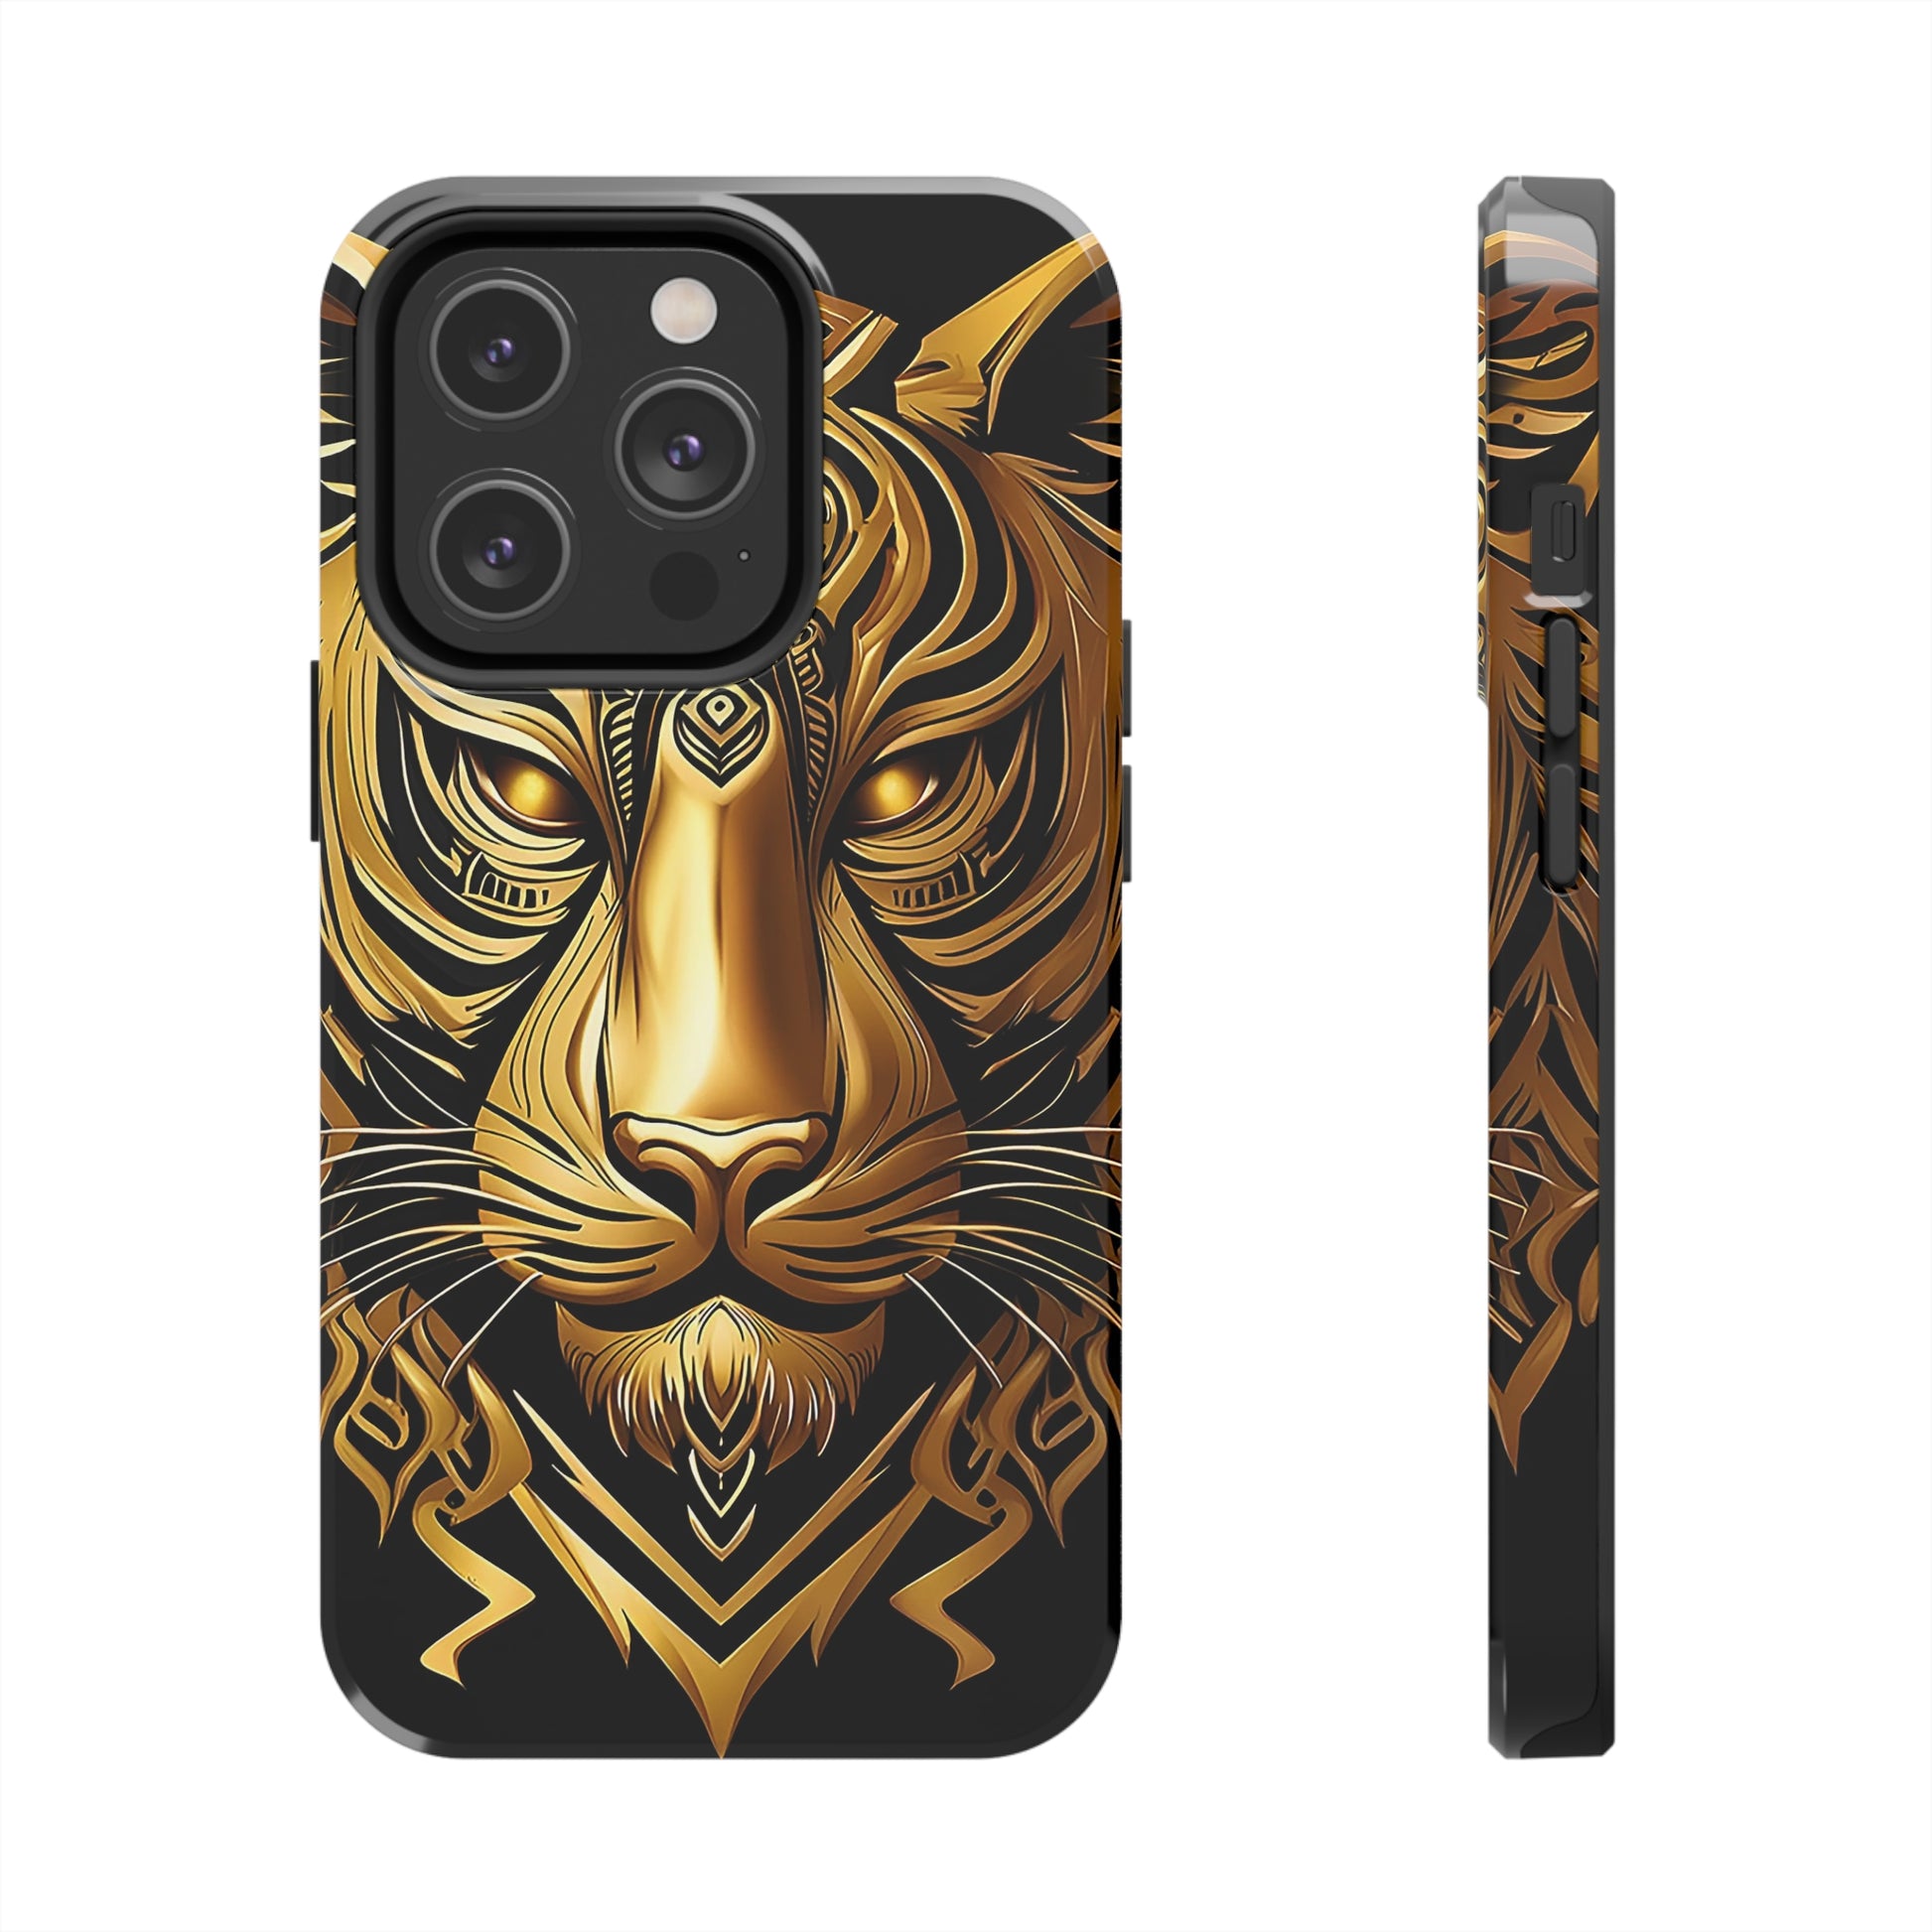 Big Cat Themed iPhone 14 Tough Case - Gold Tribal Tiger Head Printed on Phone Case for iPhone 14 Pro